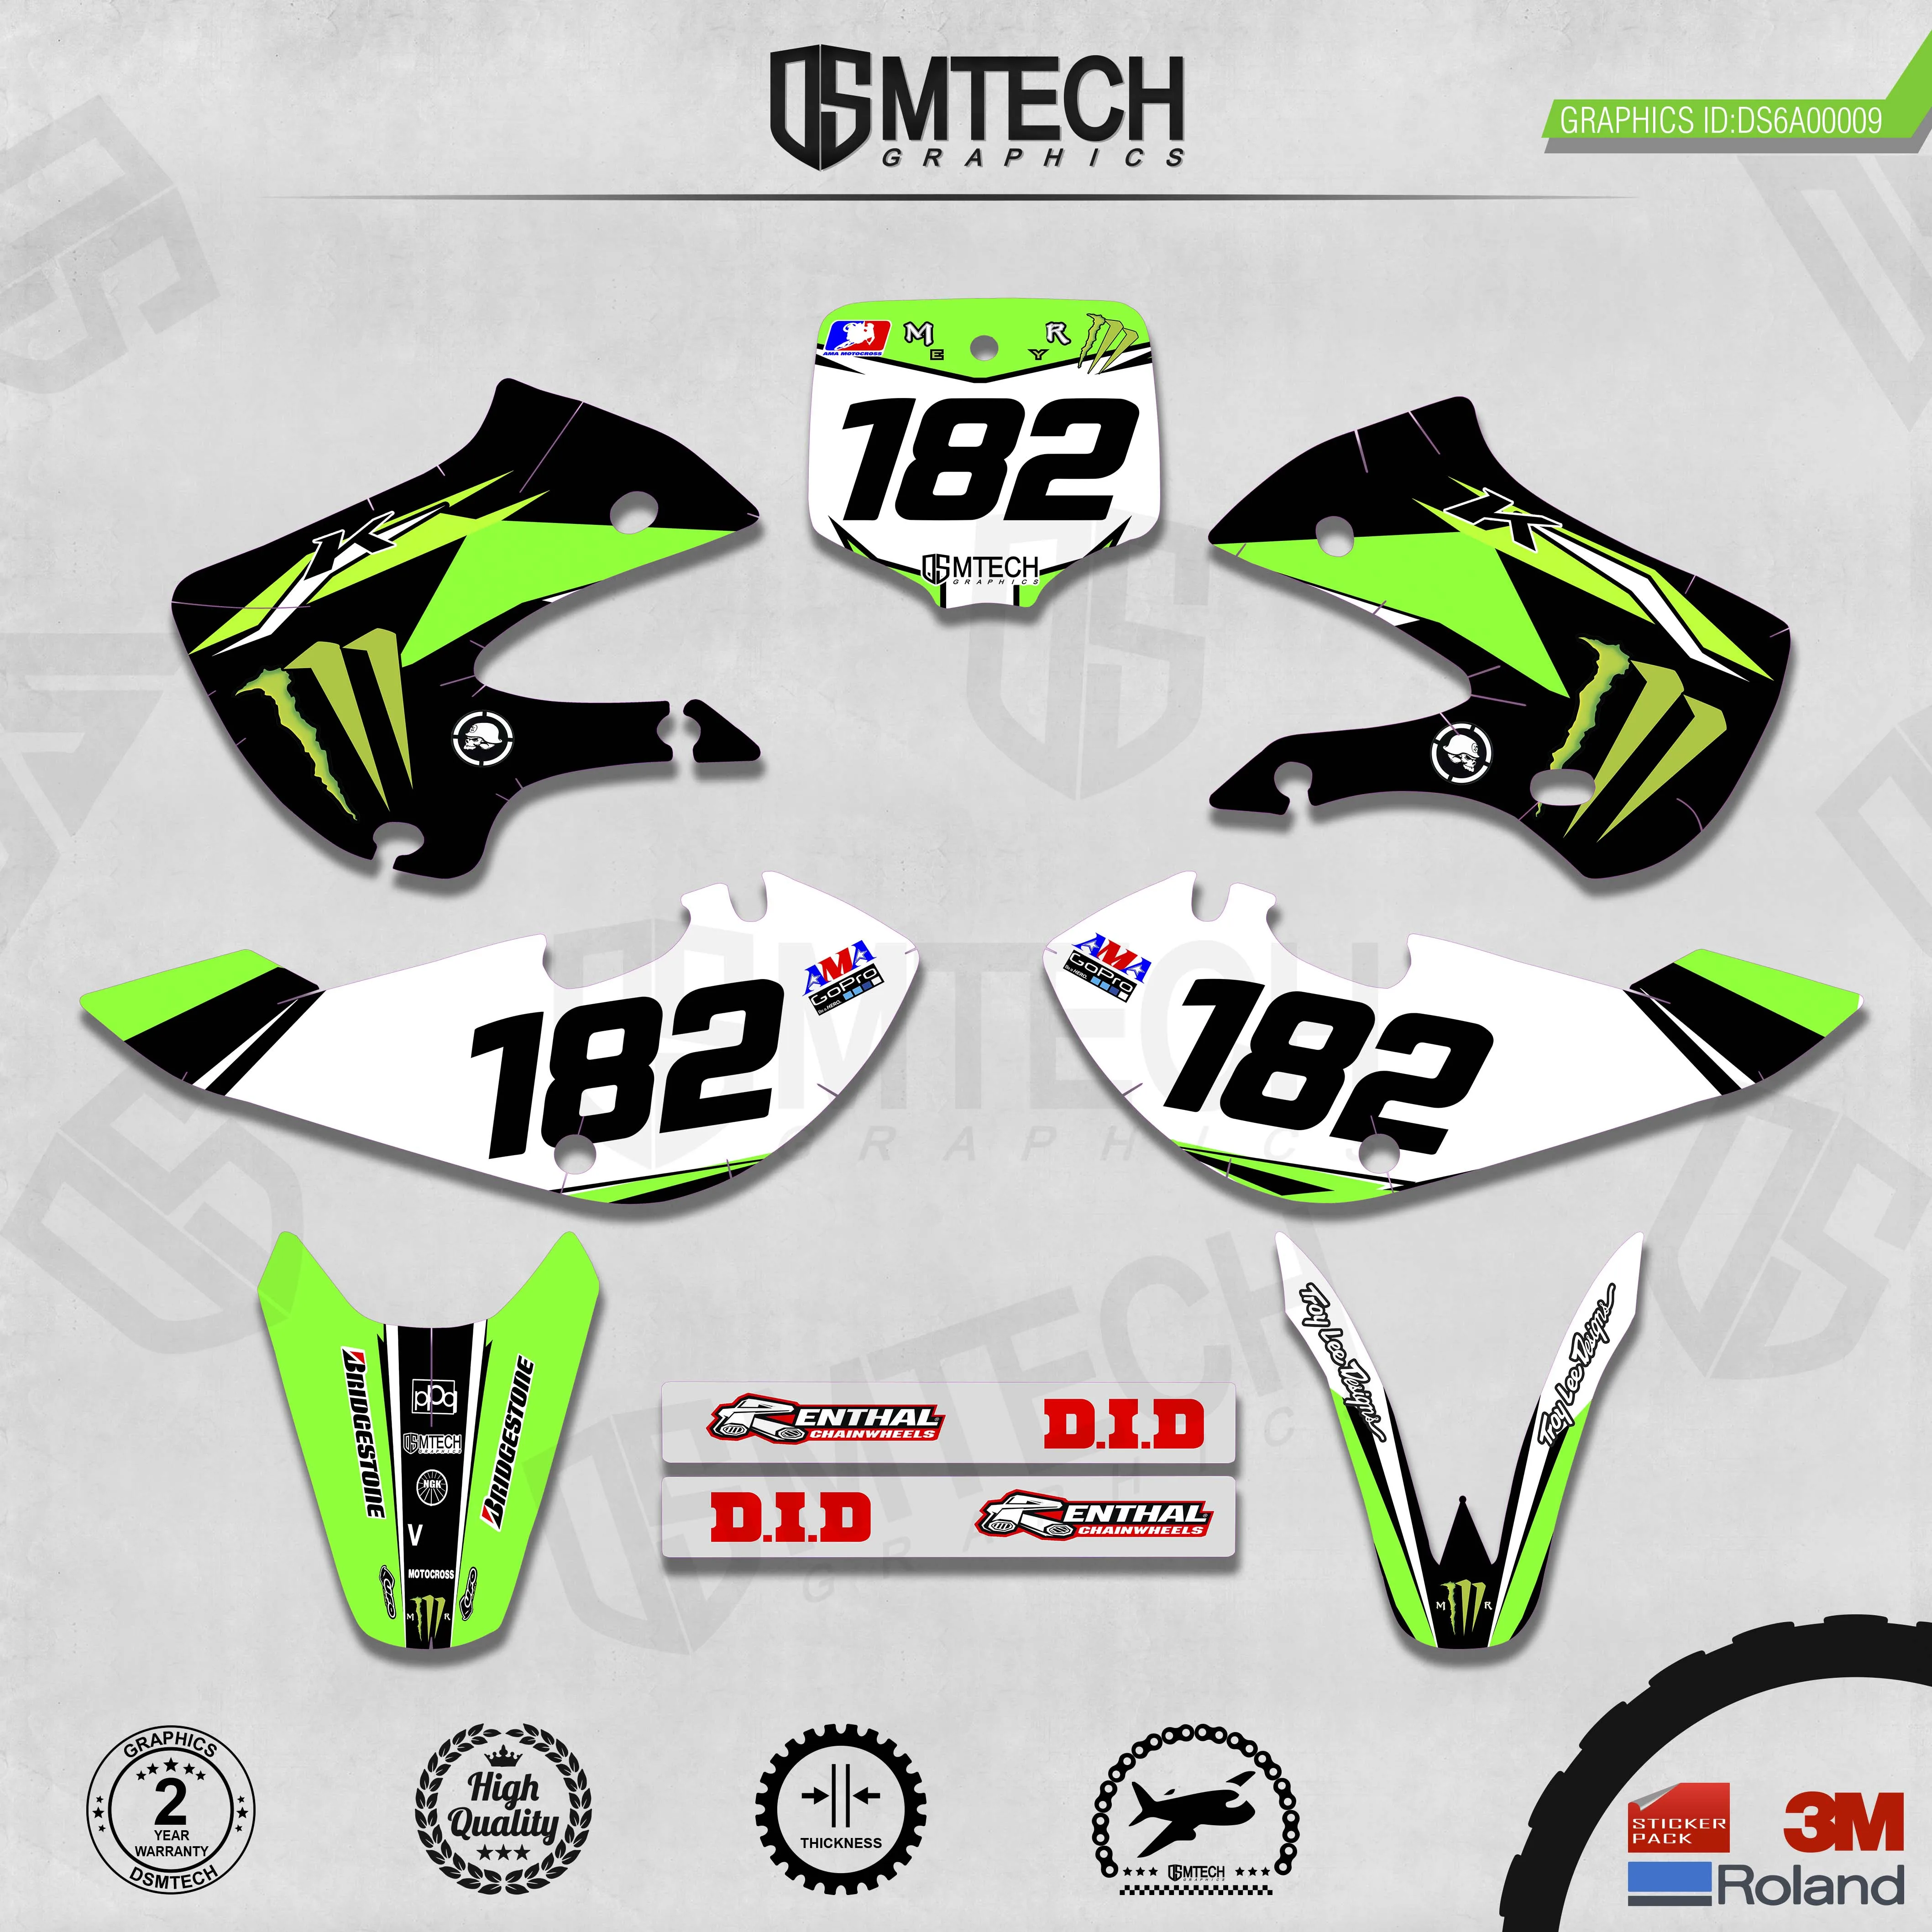 DSMTECH Customized Team Graphics Backgrounds Decals 3M Custom Stickers For KAWASAKI  2000-2020 KX65 009